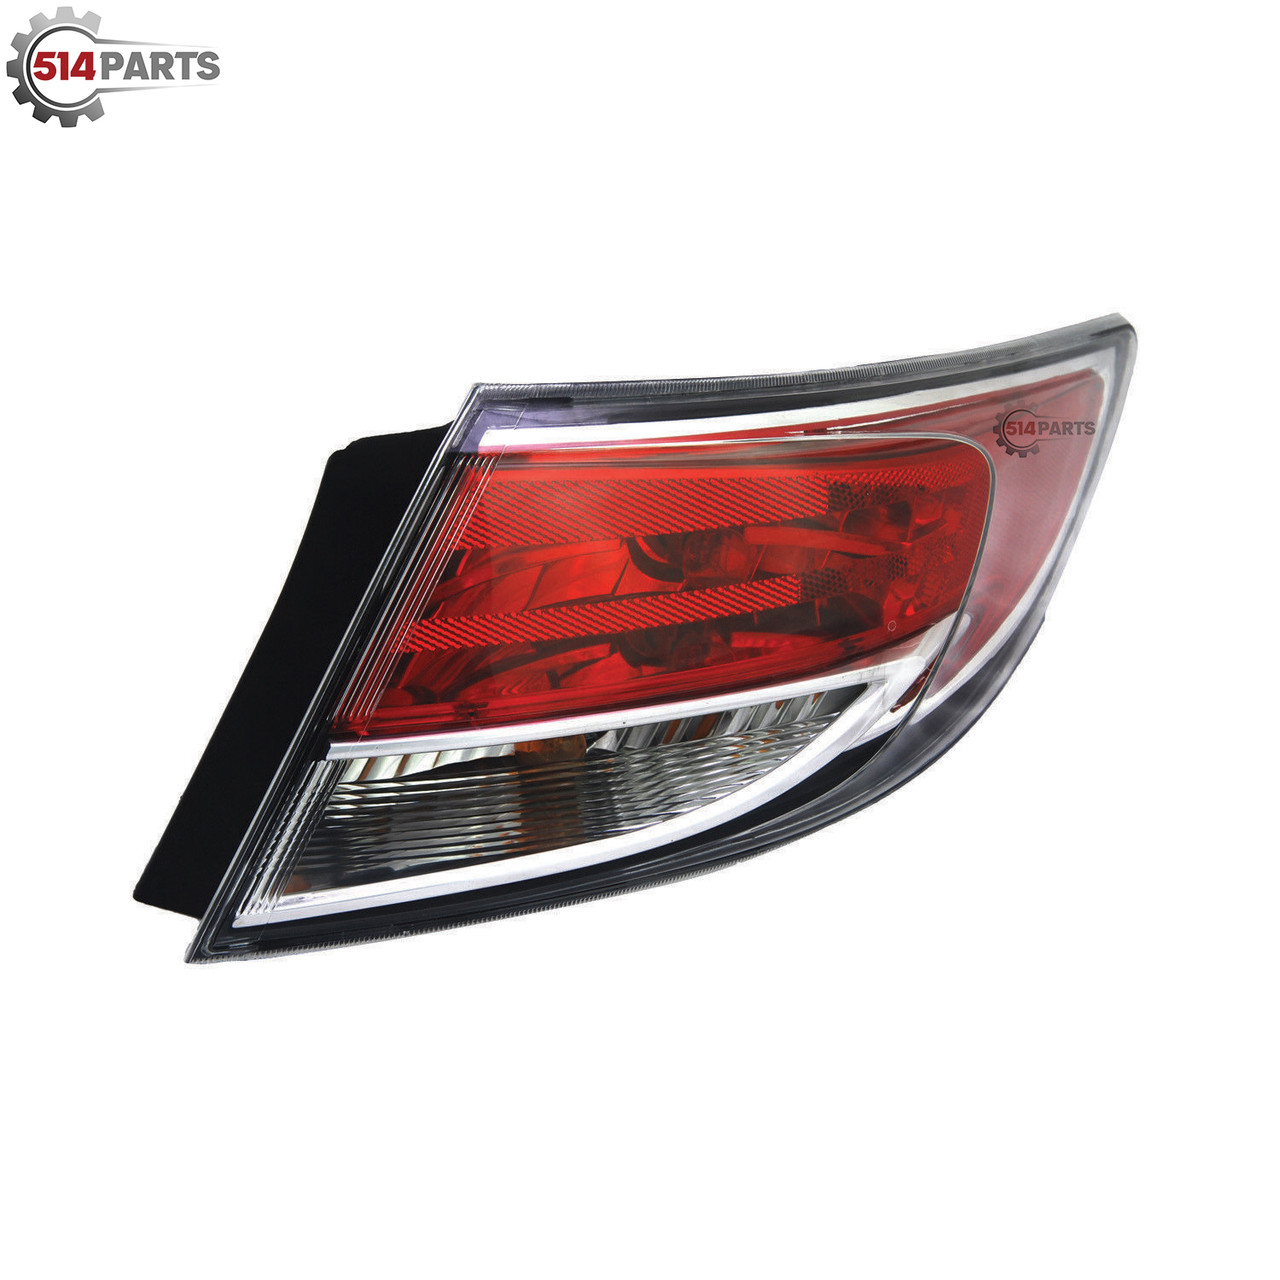 2009 - 2013 MAZDA 6 BULB TYPE TAIL LIGHTS High Quality - PHARES ARRIERE avec AMPOULE Haute Qualite